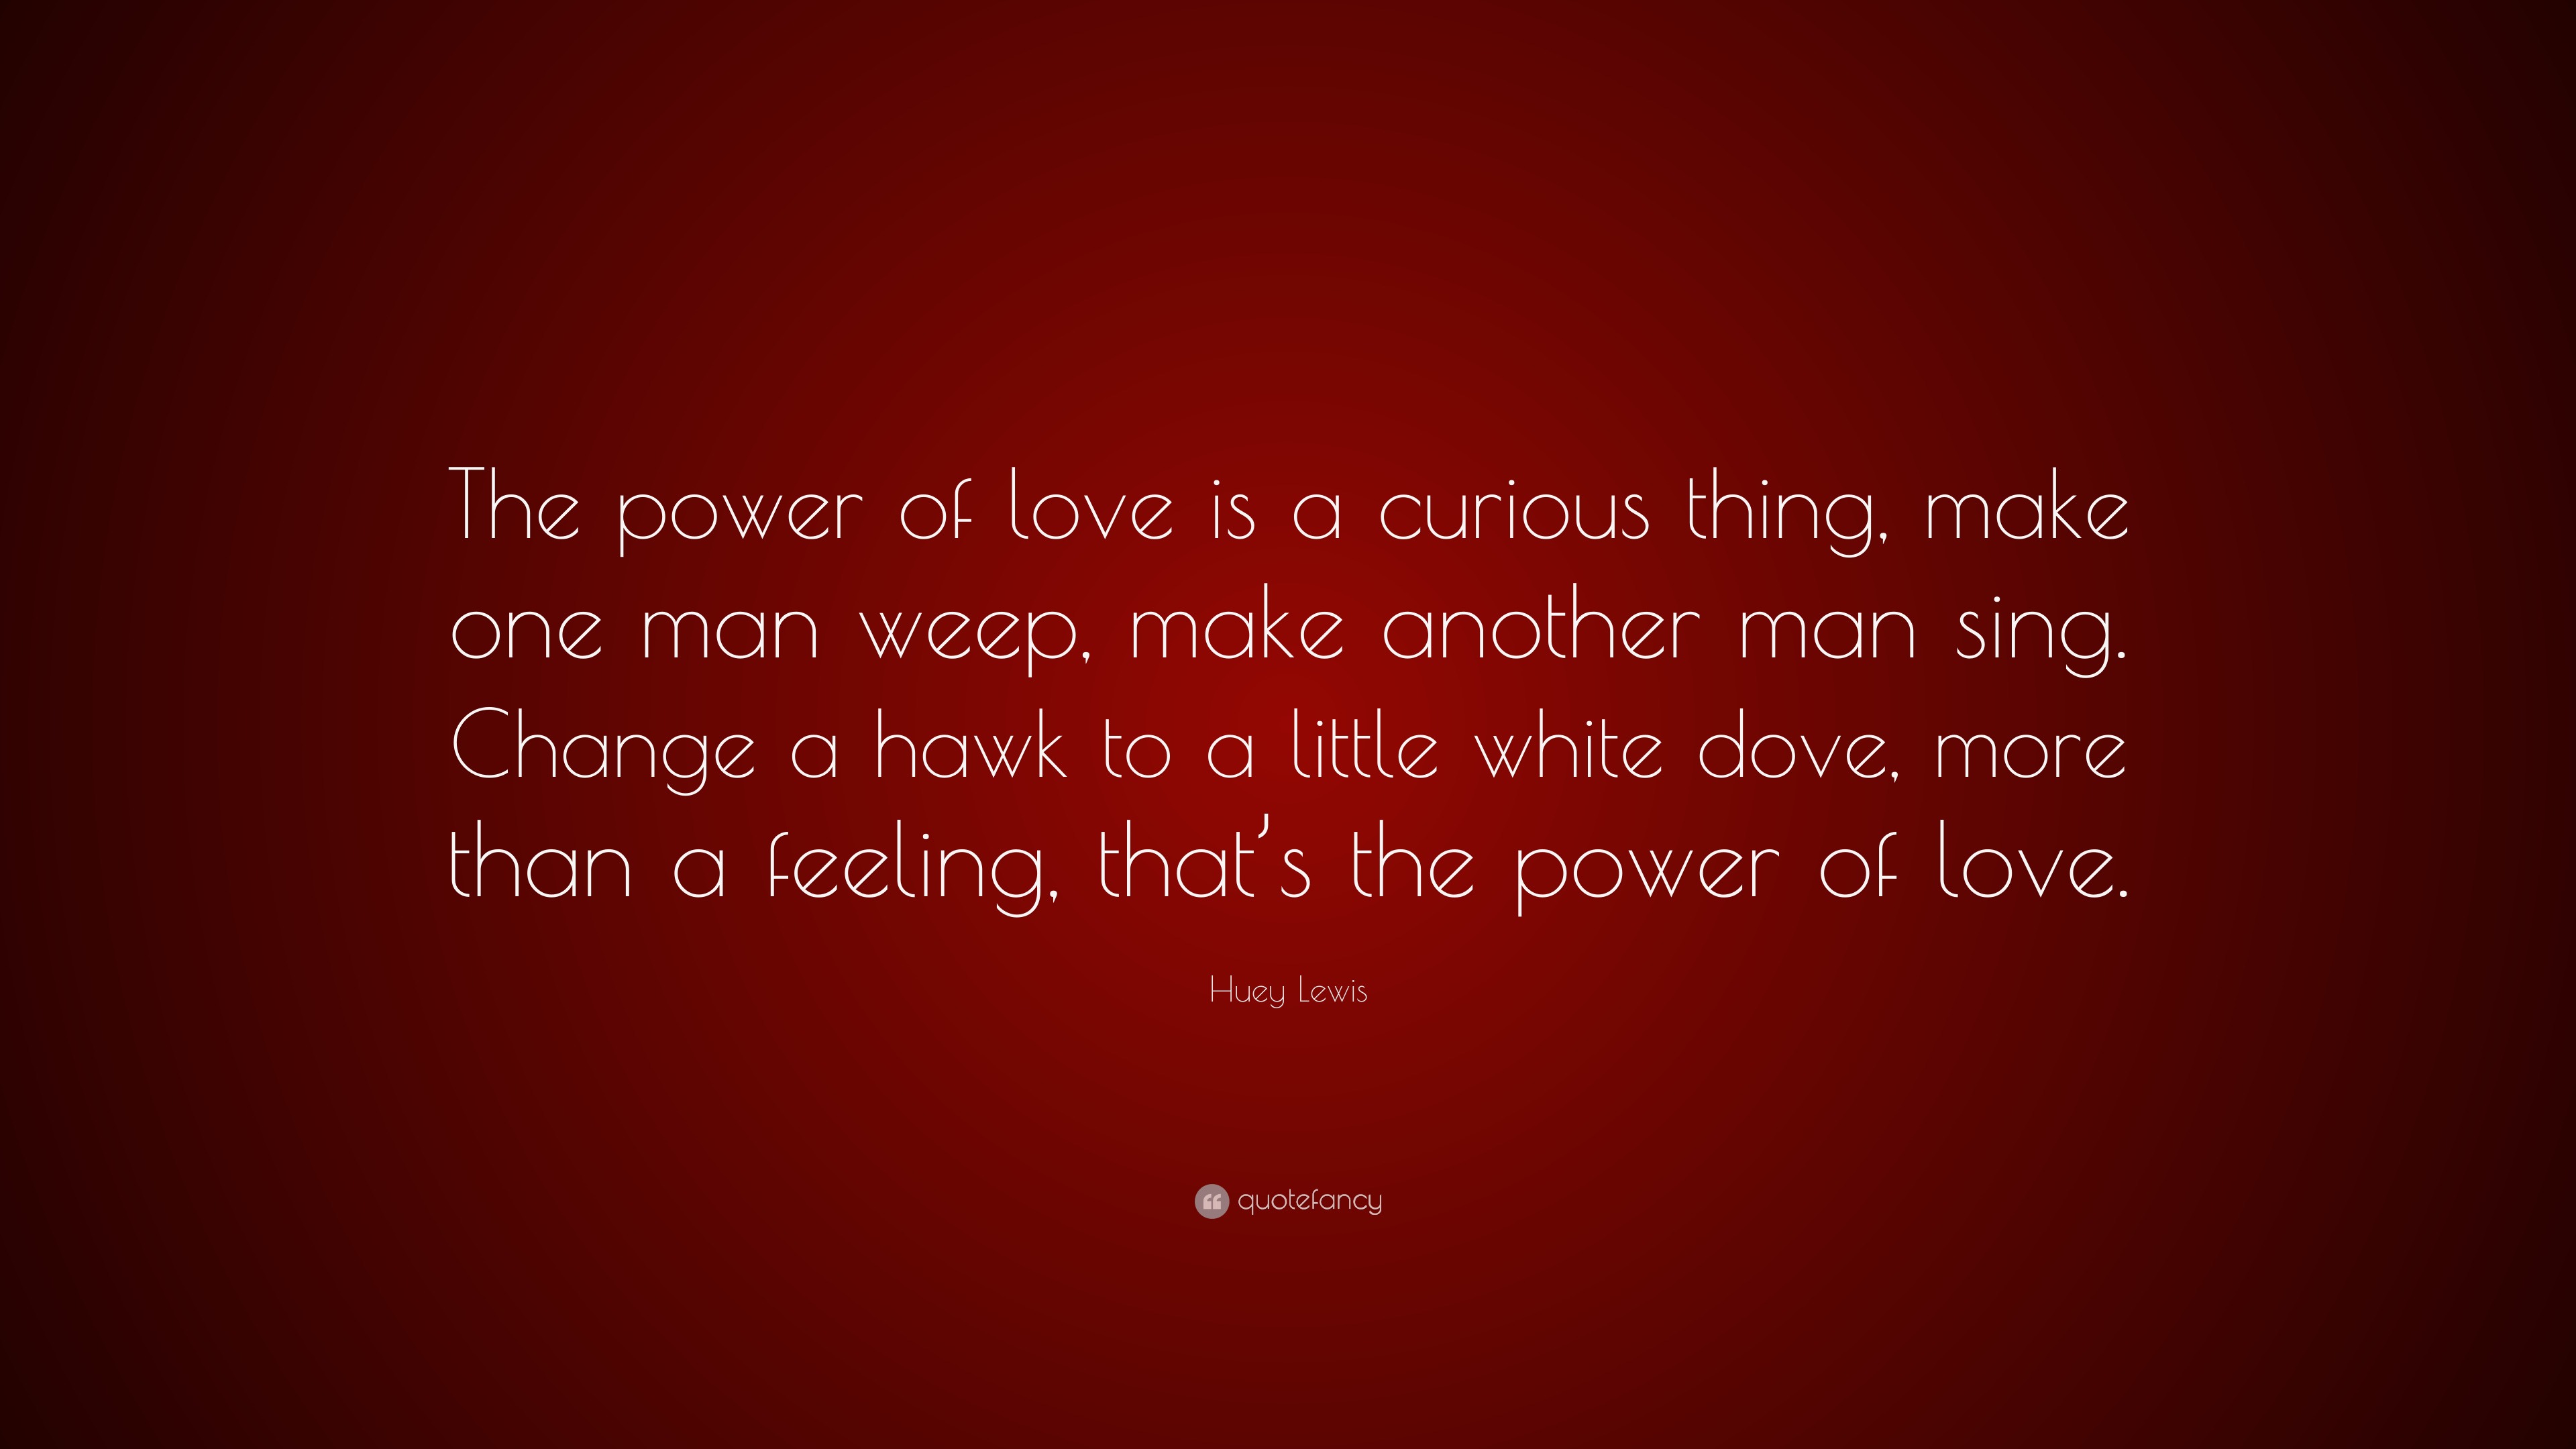 Huey Lewis Quote “The power of love is a curious thing make one